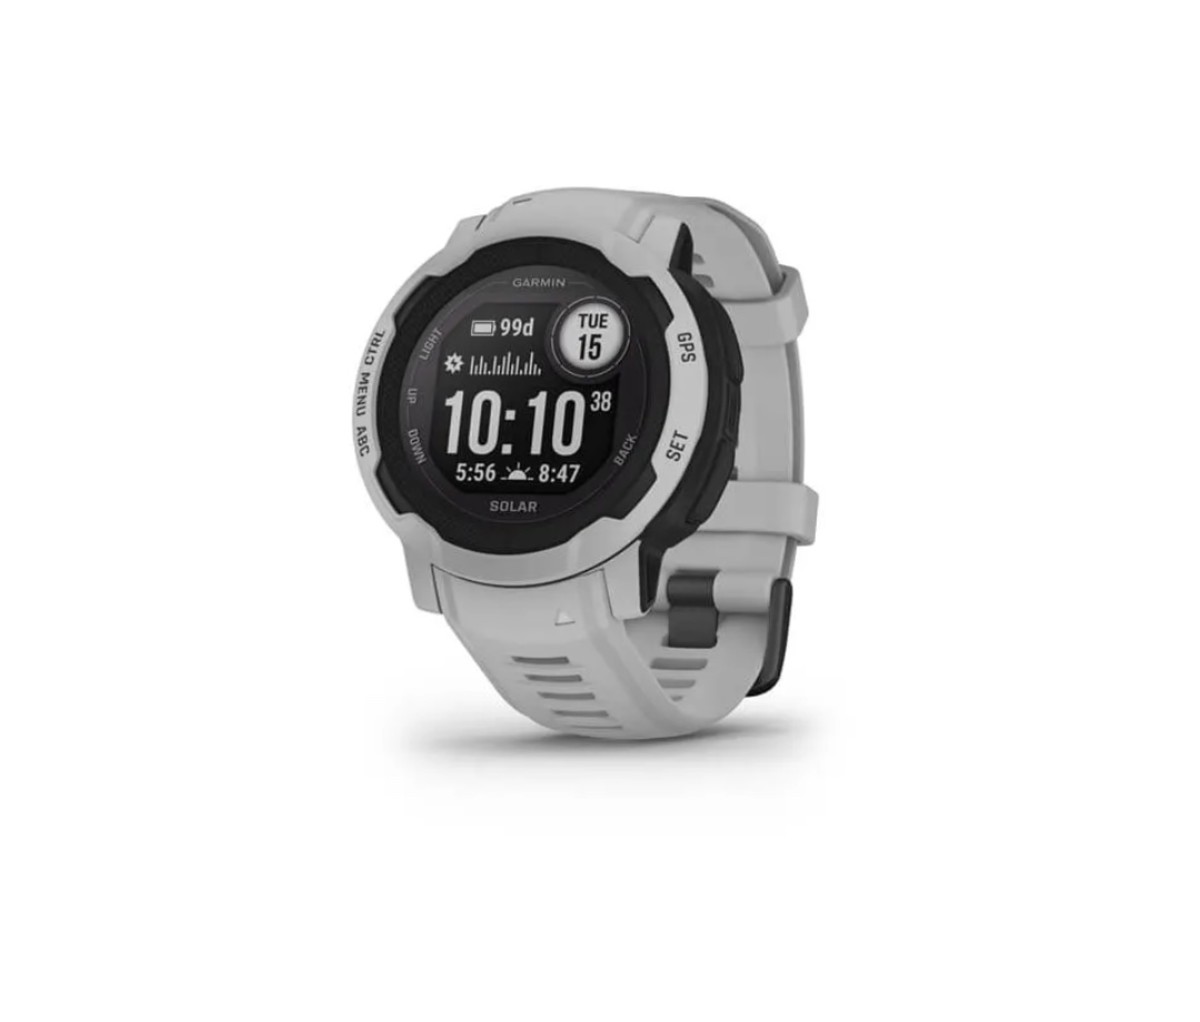 Track your progress through the woods with the Garmin Instinct 2 smartwatch.